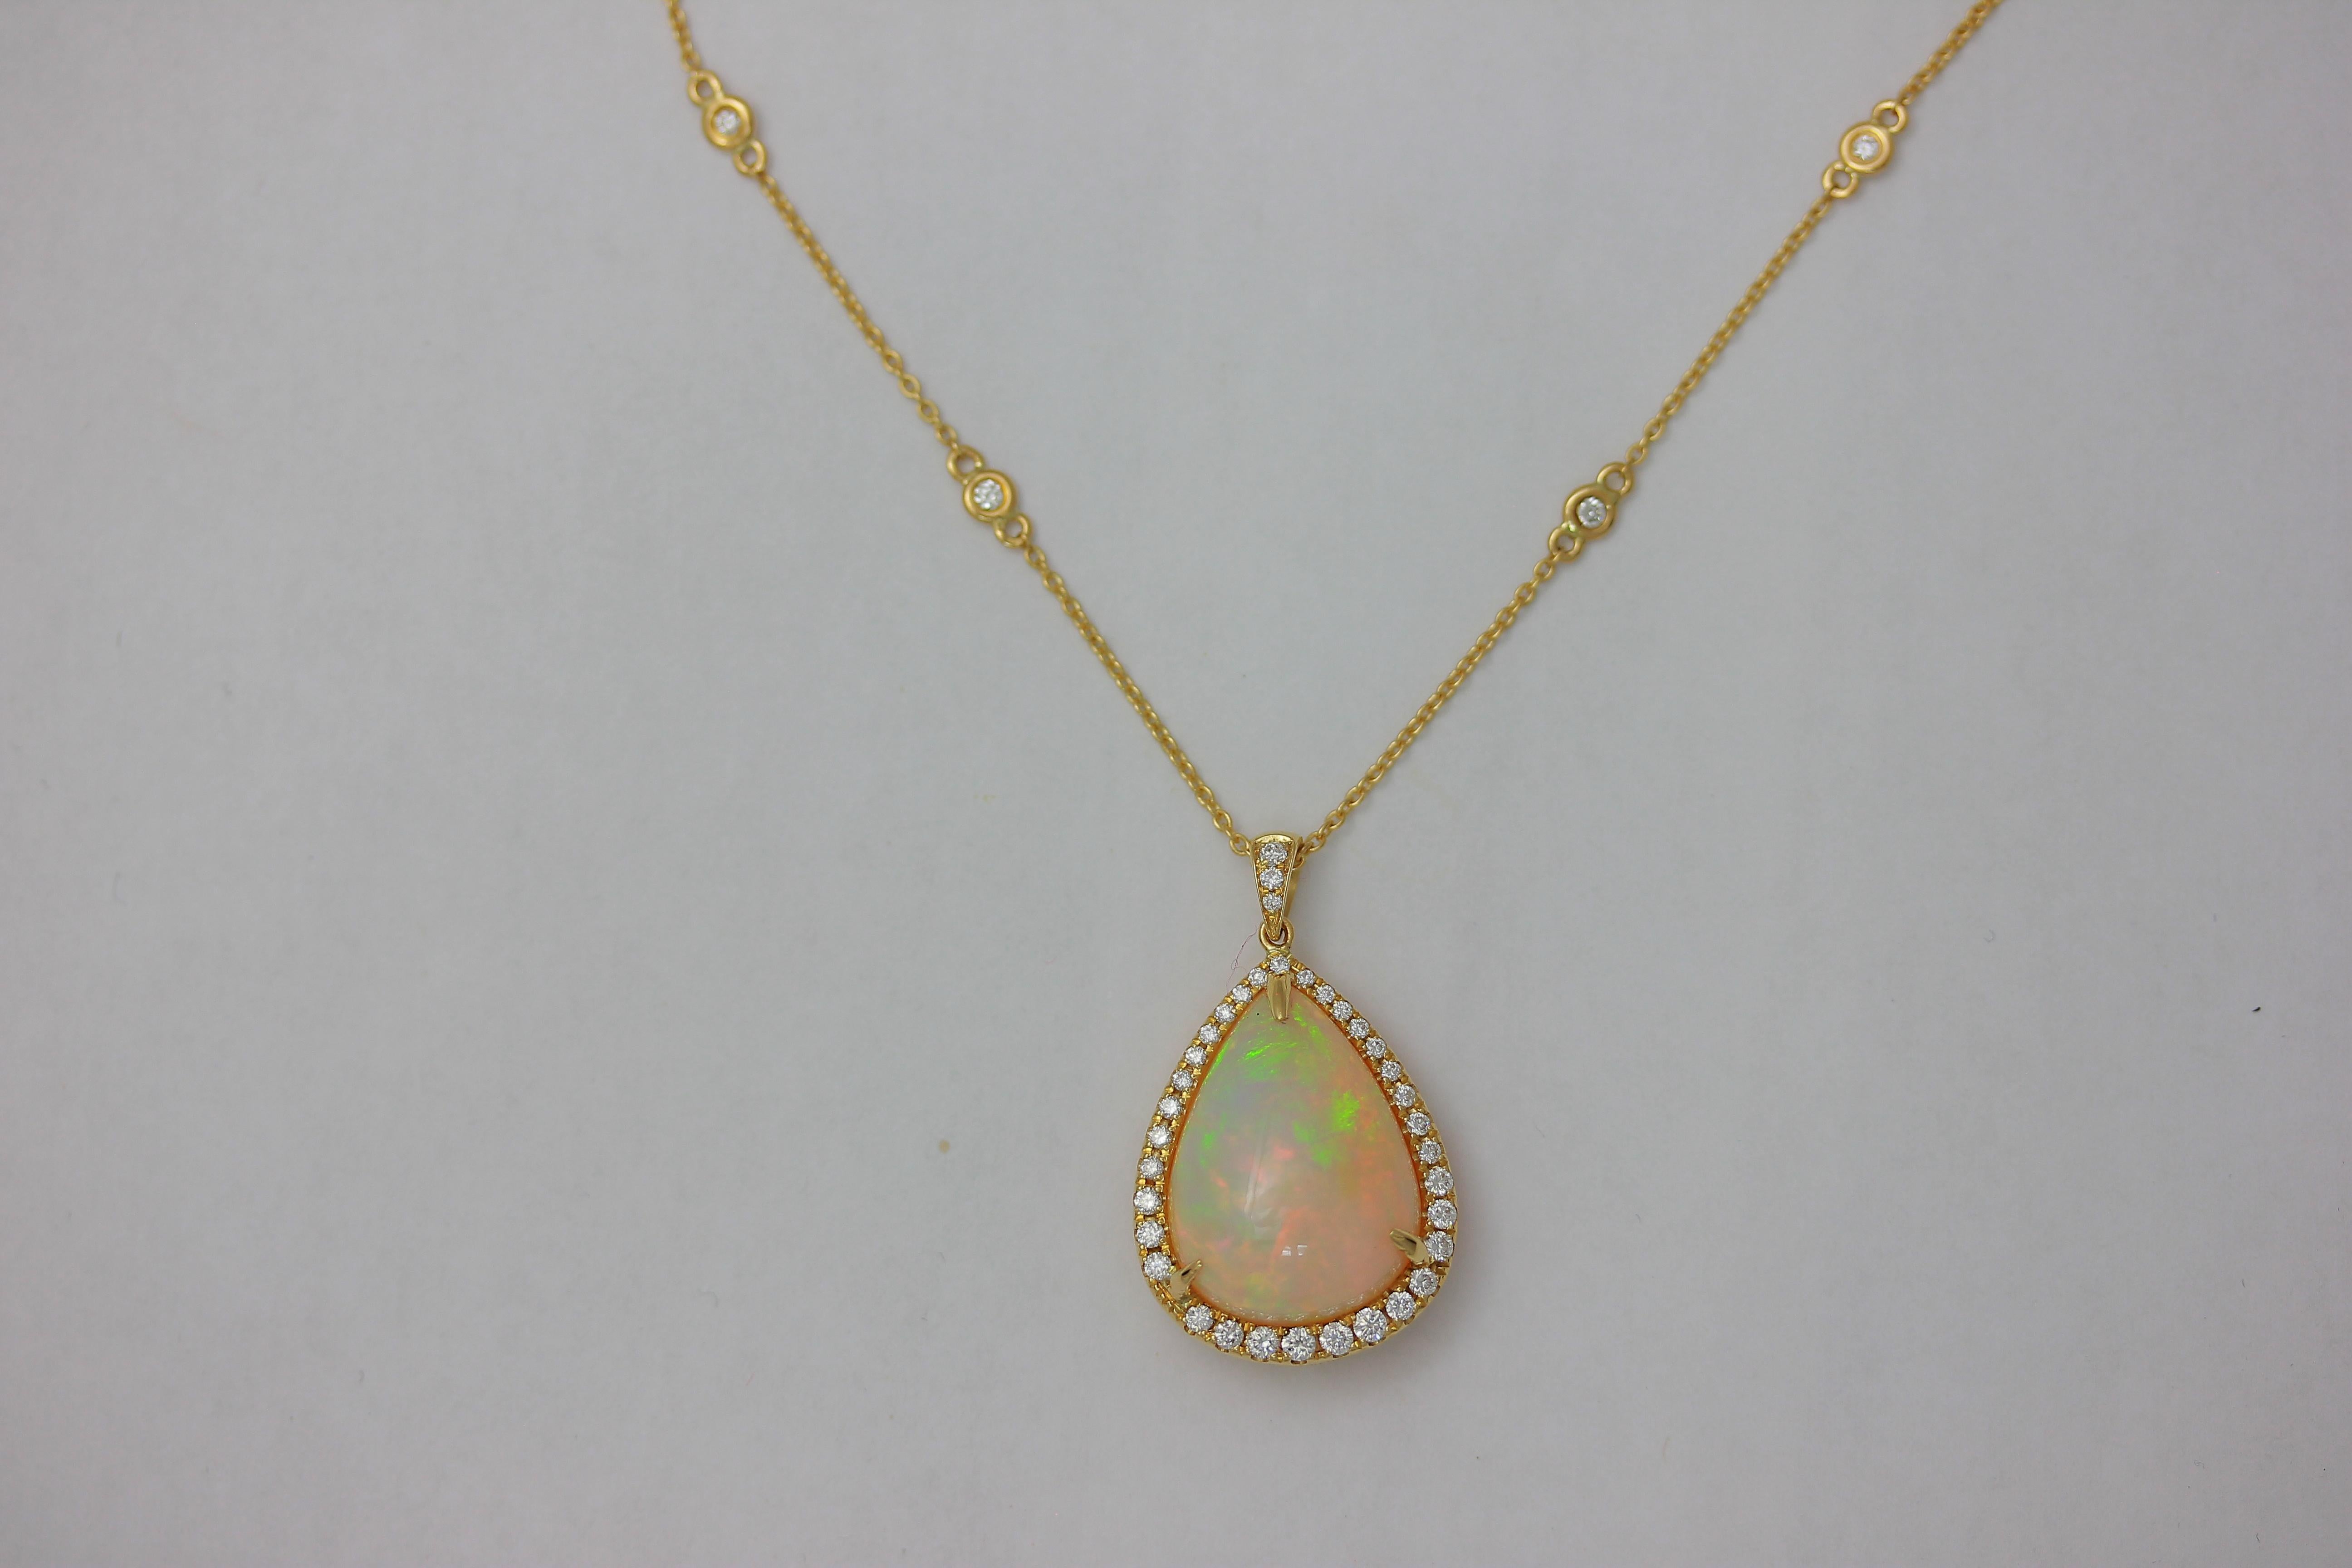 18K YG CAB PS ETHIOPIAN OPAL WITH DIA HALO AND BALE OAK PENDANT WITH DIAMOND CHAIN, OPAL 8.30 CT, 6 DIA 0.12 Carats, 36 DIA 0.40 Carats